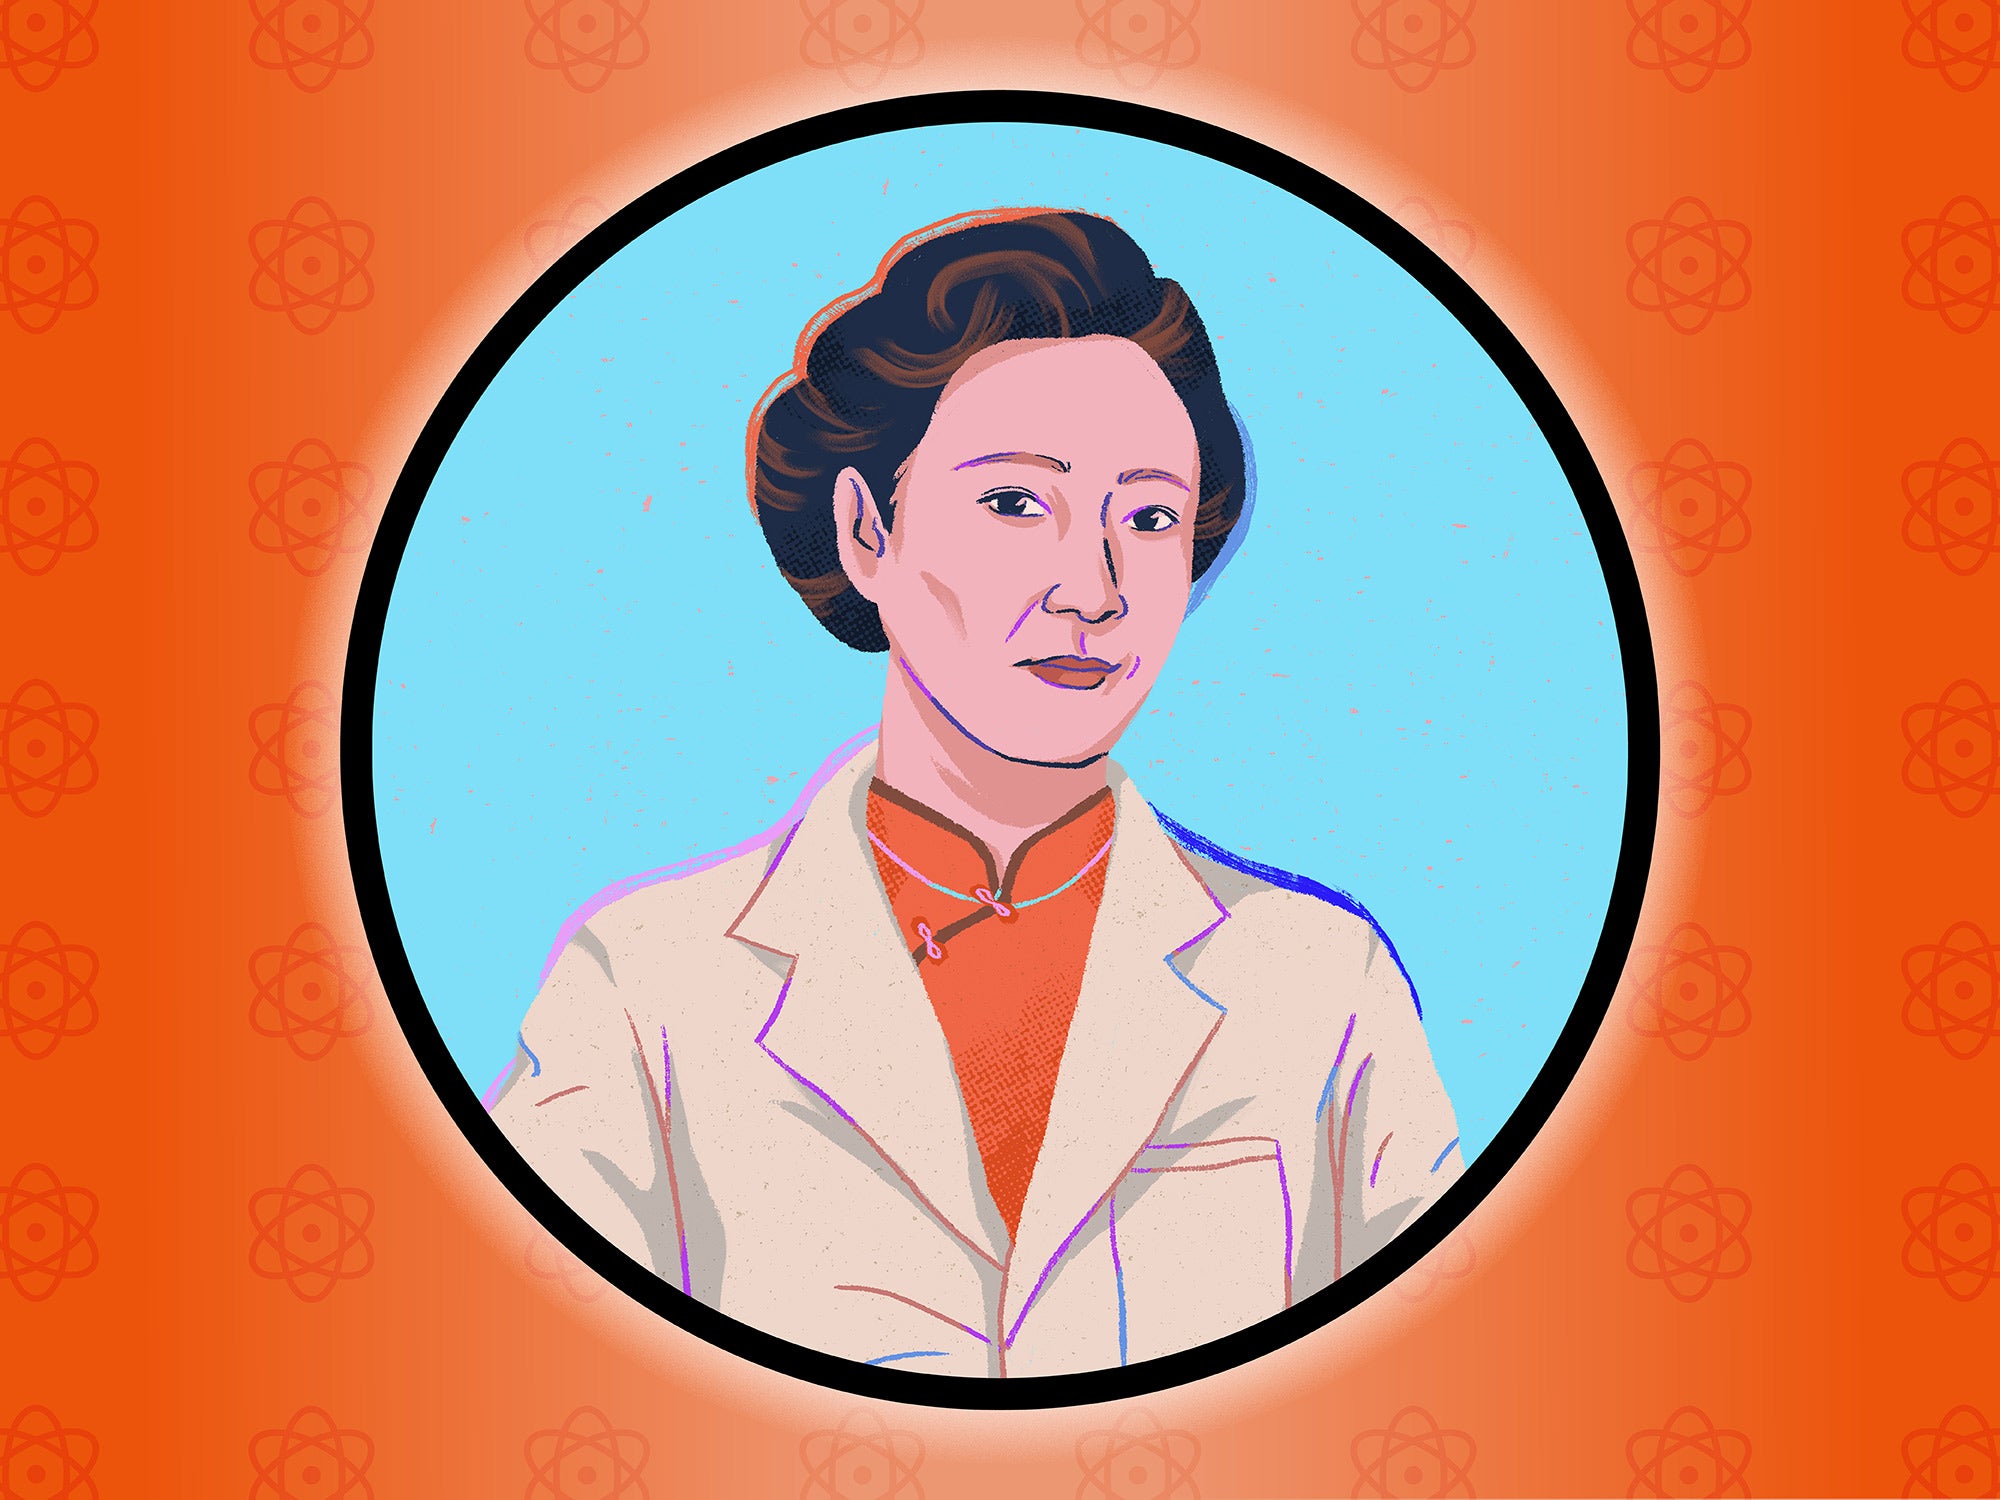 Chien-Shiung Wu’s work defied the laws of physics